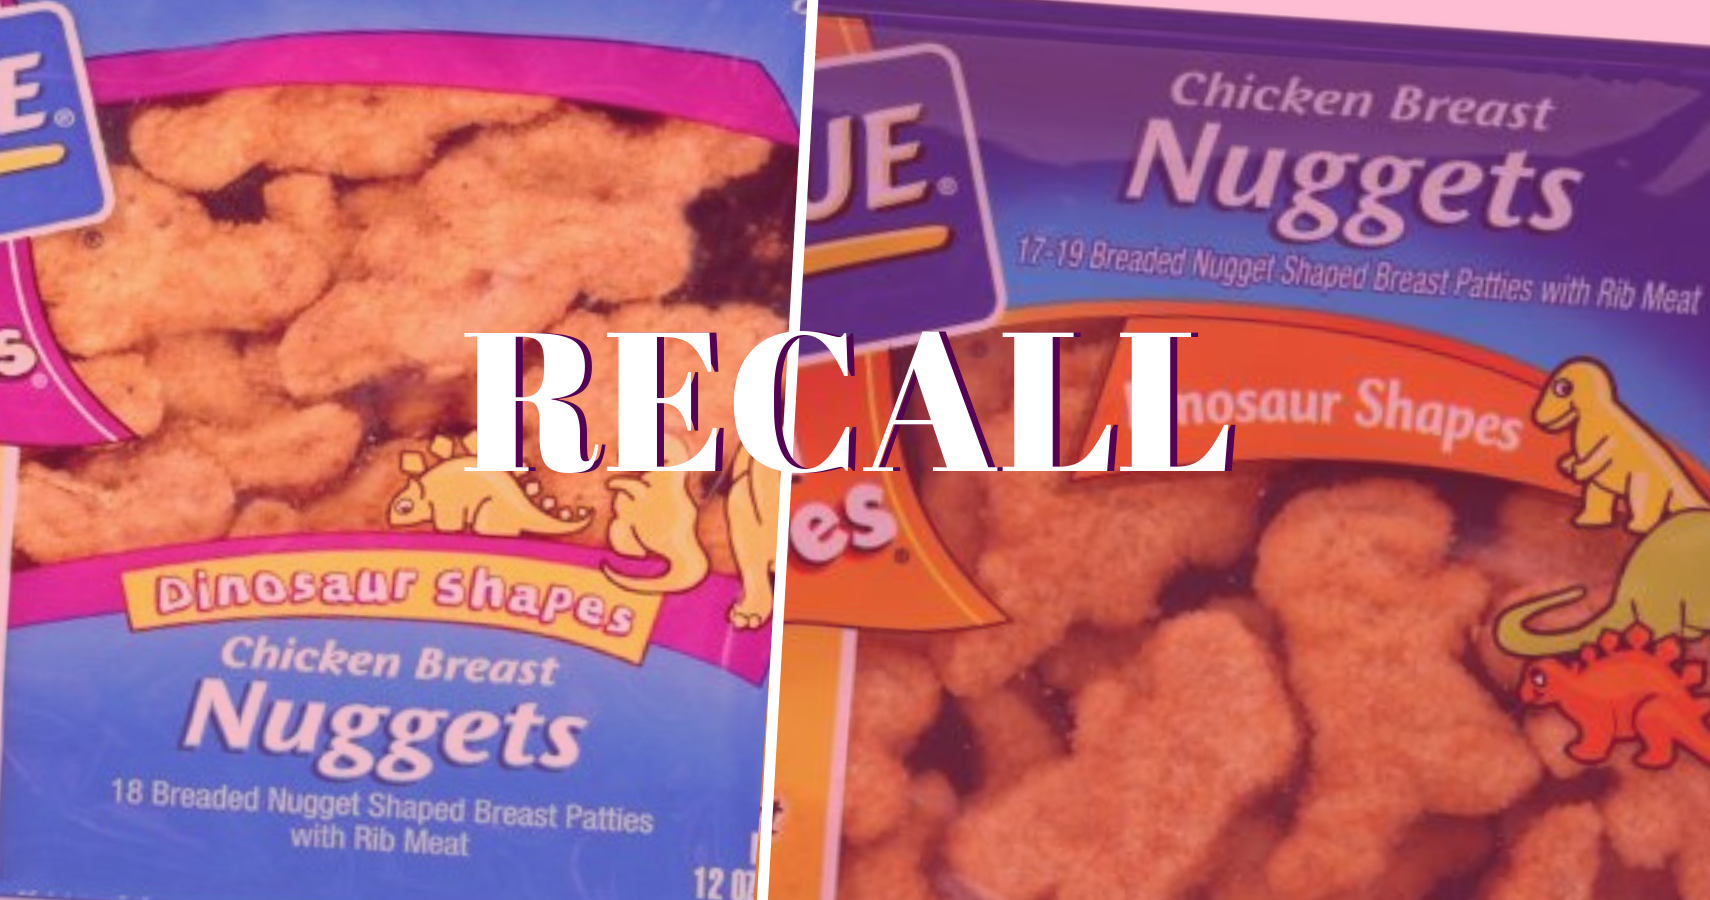 Perdue Is Recalling Over 16,000 Pounds of Dinosaur Chicken Nuggets